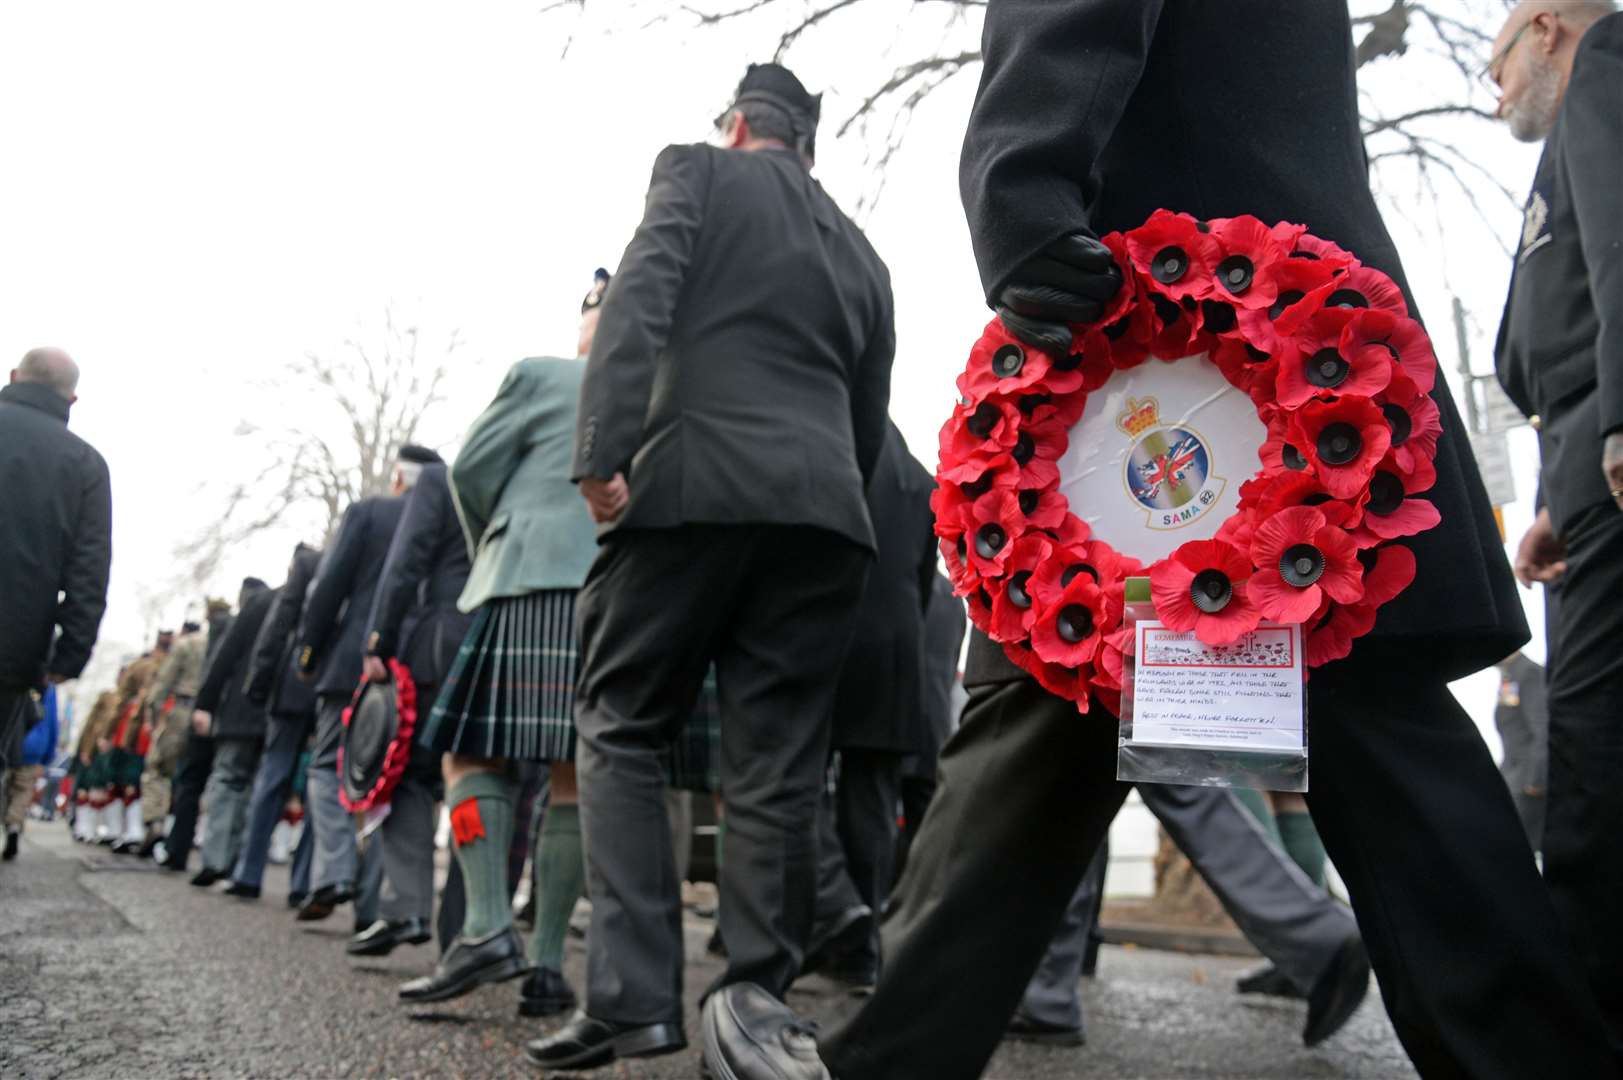 Several streets in Inverness will close on Sunday afternoon for the Remembrance parade and service.